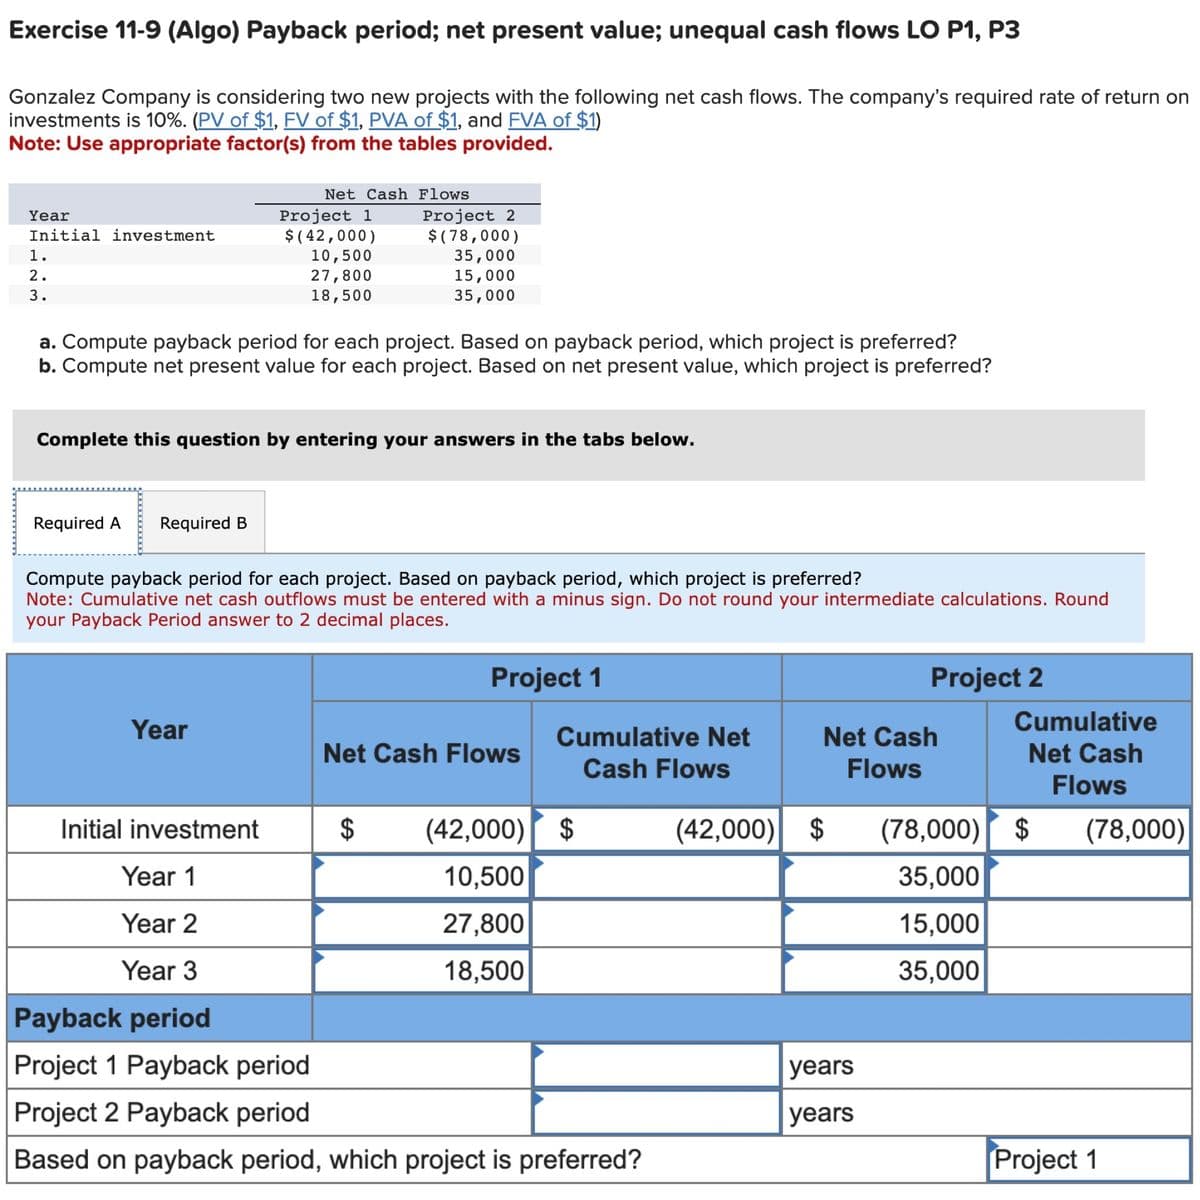 Exercise 11-9 (Algo) Payback period; net present value; unequal cash flows LO P1, P3
Gonzalez Company is considering two new projects with the following net cash flows. The company's required rate of return on
investments is 10%. (PV of $1, FV of $1, PVA of $1, and FVA of $1)
Note: Use appropriate factor(s) from the tables provided.
Year
Initial investment
1.
2.
3.
Required A Required B
Net Cash Flows
a. Compute payback period for each project. Based on payback period, which project is preferred?
b. Compute net present value for each project. Based on net present value, which project is preferred?
Project 1
$(42,000)
10,500
27,800
18,500
Complete this question by entering your answers in the tabs below.
Year
Initial investment
Year 1
Year 2
Year 3
Project 2
$(78,000)
35,000
15,000
35,000
Compute payback period for each project. Based on payback period, which project is preferred?
Note: Cumulative net cash outflows must be entered with a minus sign. Do not round your intermediate calculations. Round
your Payback Period answer to 2 decimal places.
$
Project 1
Net Cash Flows
Cumulative Net
Cash Flows
(42,000) $
10,500
27,800
18,500
Payback period
Project 1 Payback period
Project 2 Payback period
Based on payback period, which project is preferred?
Net Cash
Flows
(42,000) $
Project 2
years
years
Cumulative
Net Cash
Flows
(78,000) $
35,000
15,000
35,000
(78,000)
Project 1